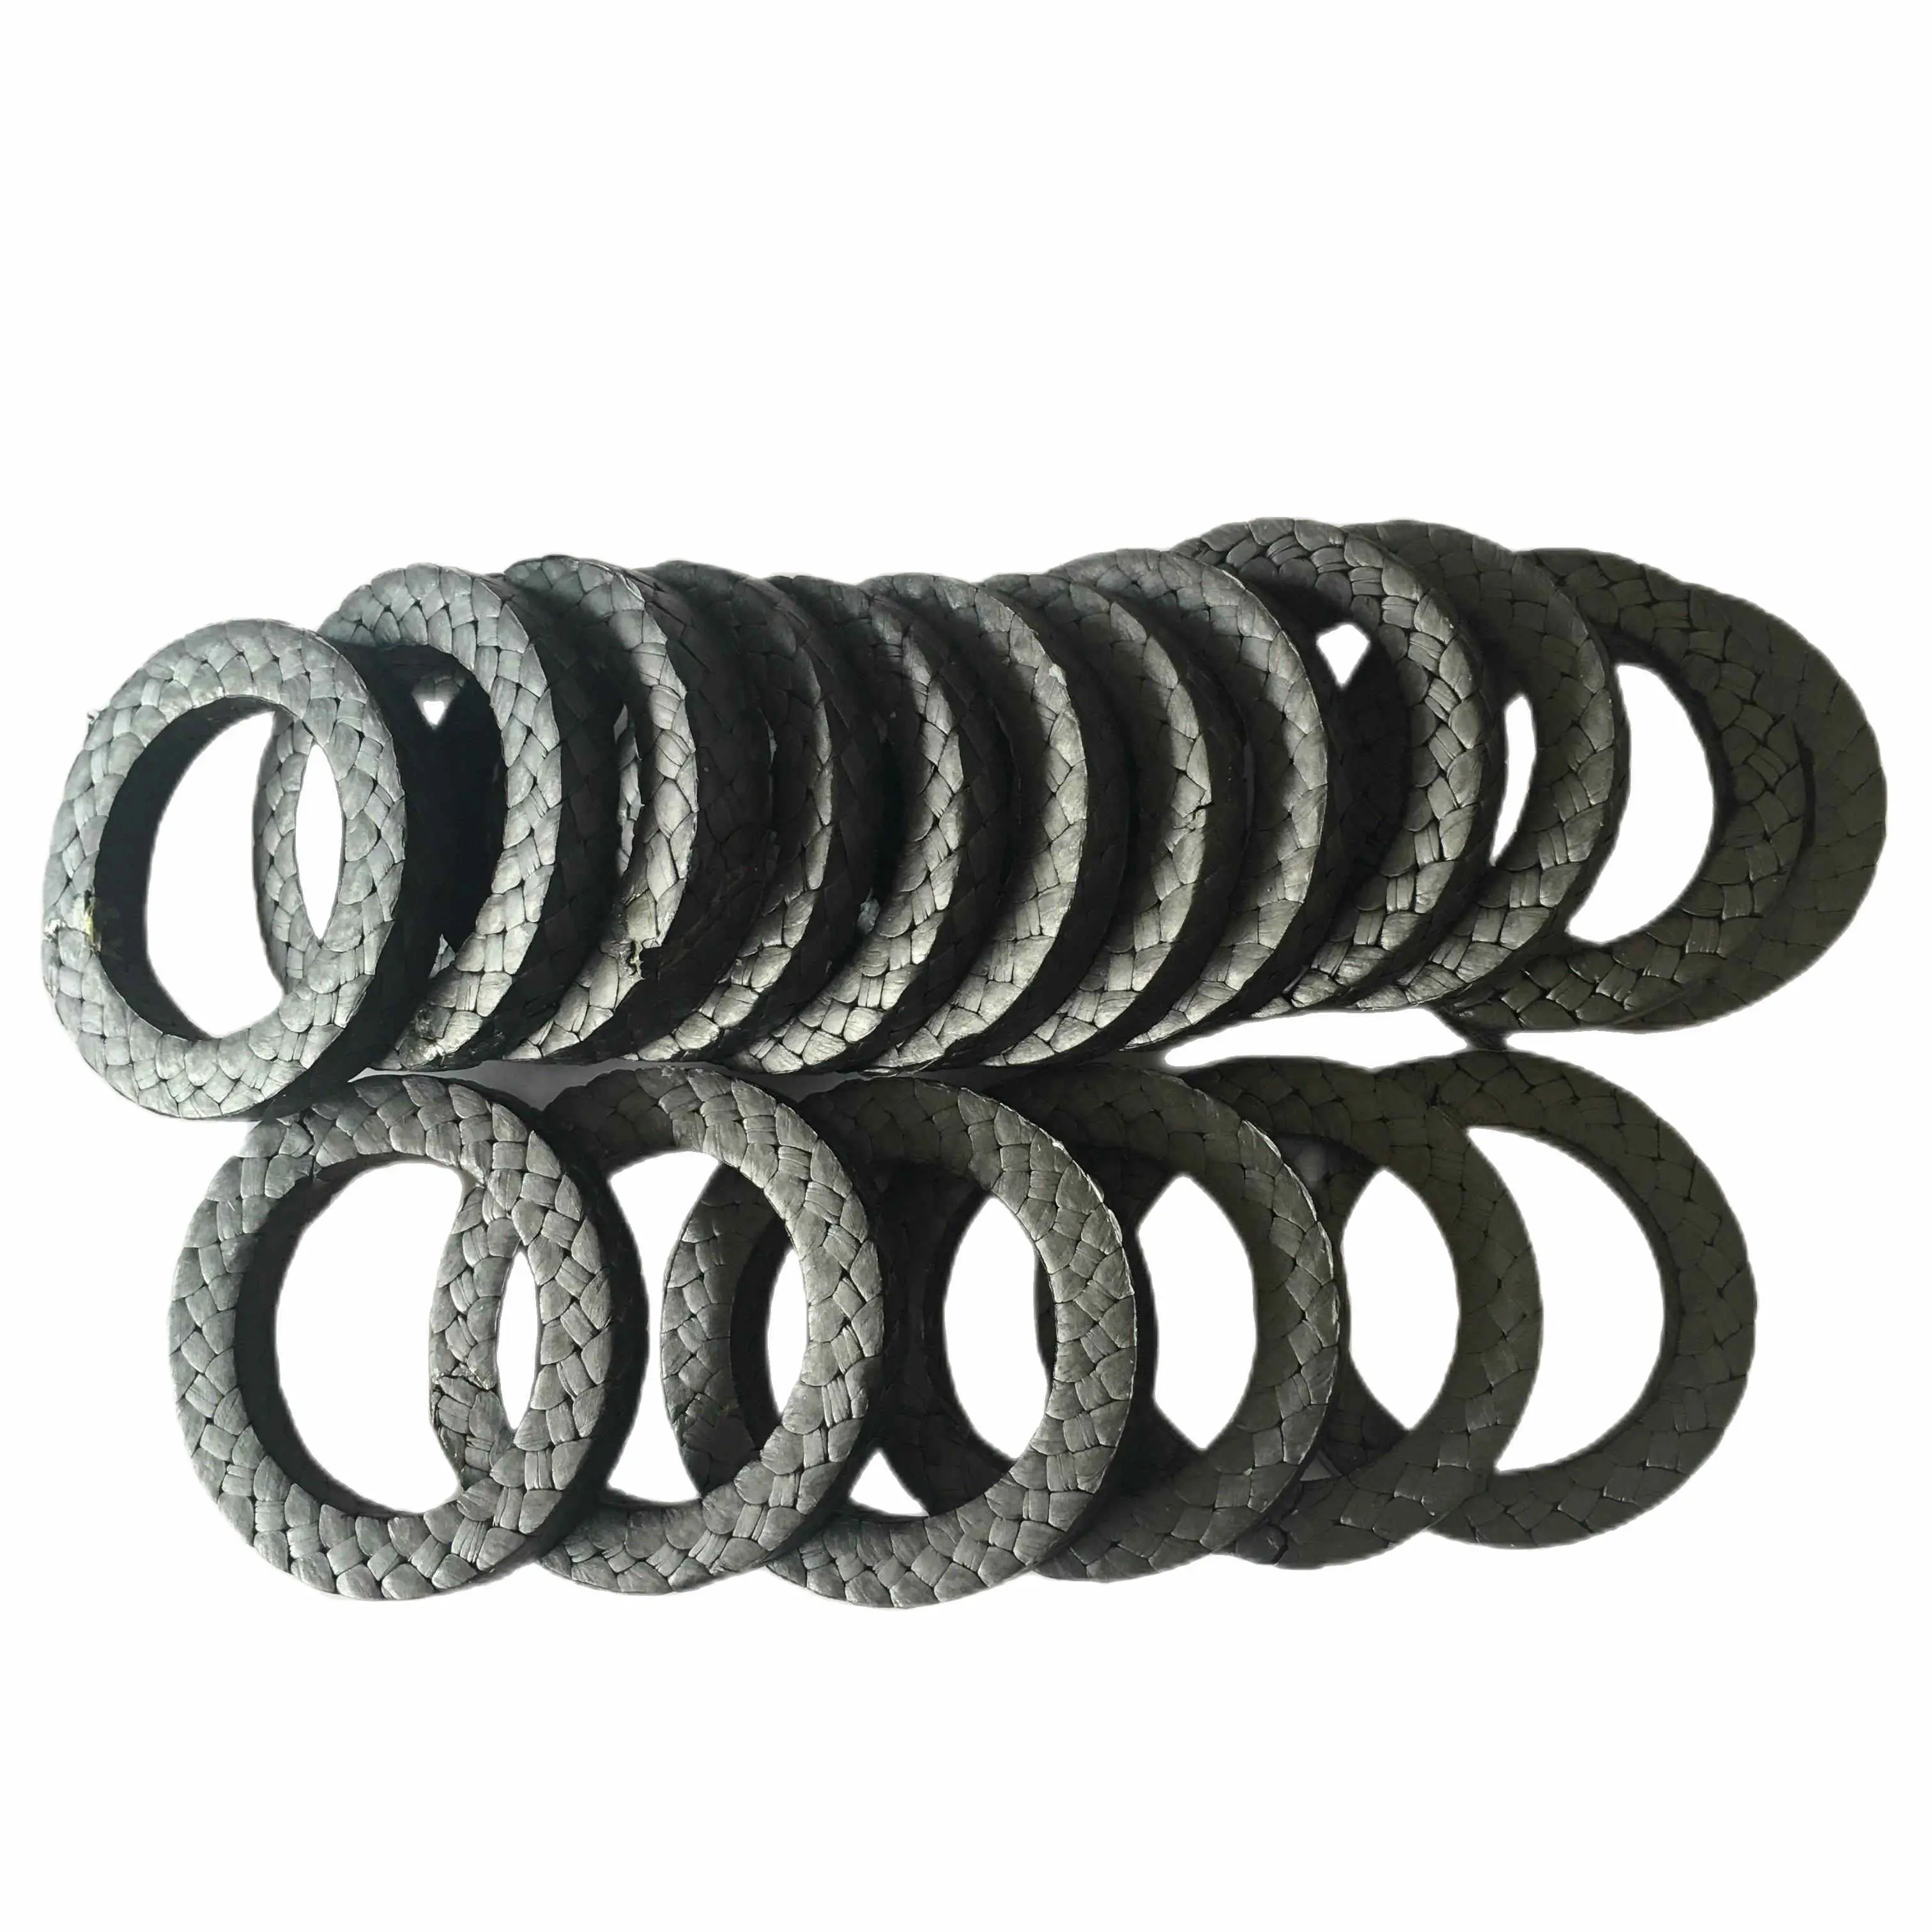 Graphite PTFE packing ring gasket black PTFE packing ring gasket Wear resistance  lubrication and corrosion resistance